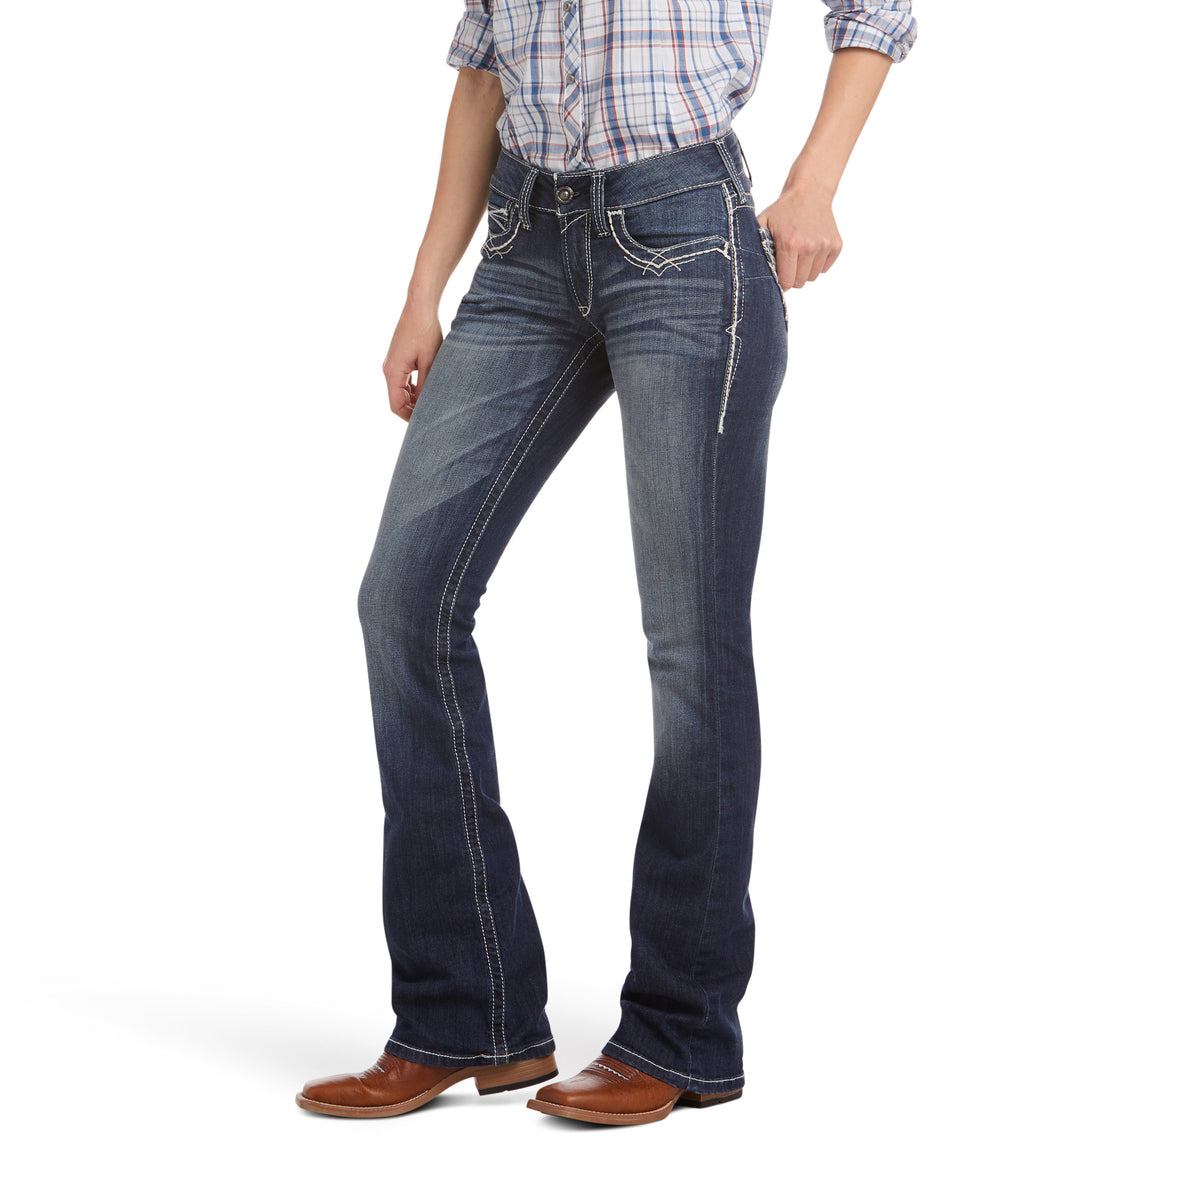 R.E.A.L BOOTCUT ENTWINED JEAN